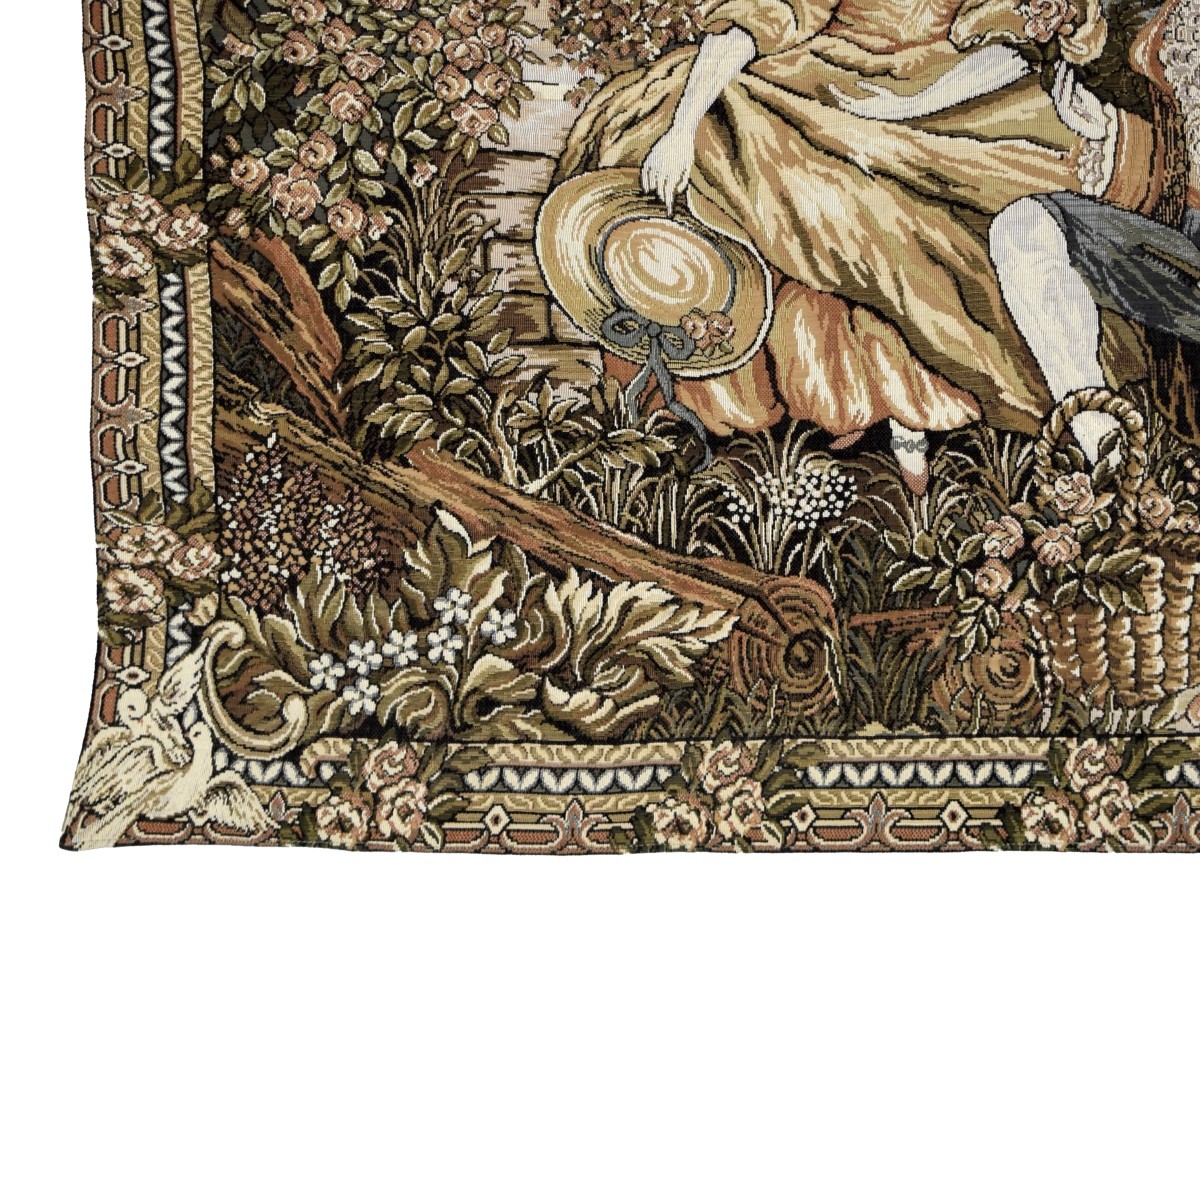 Antique Style Wall Hanging Tapestry